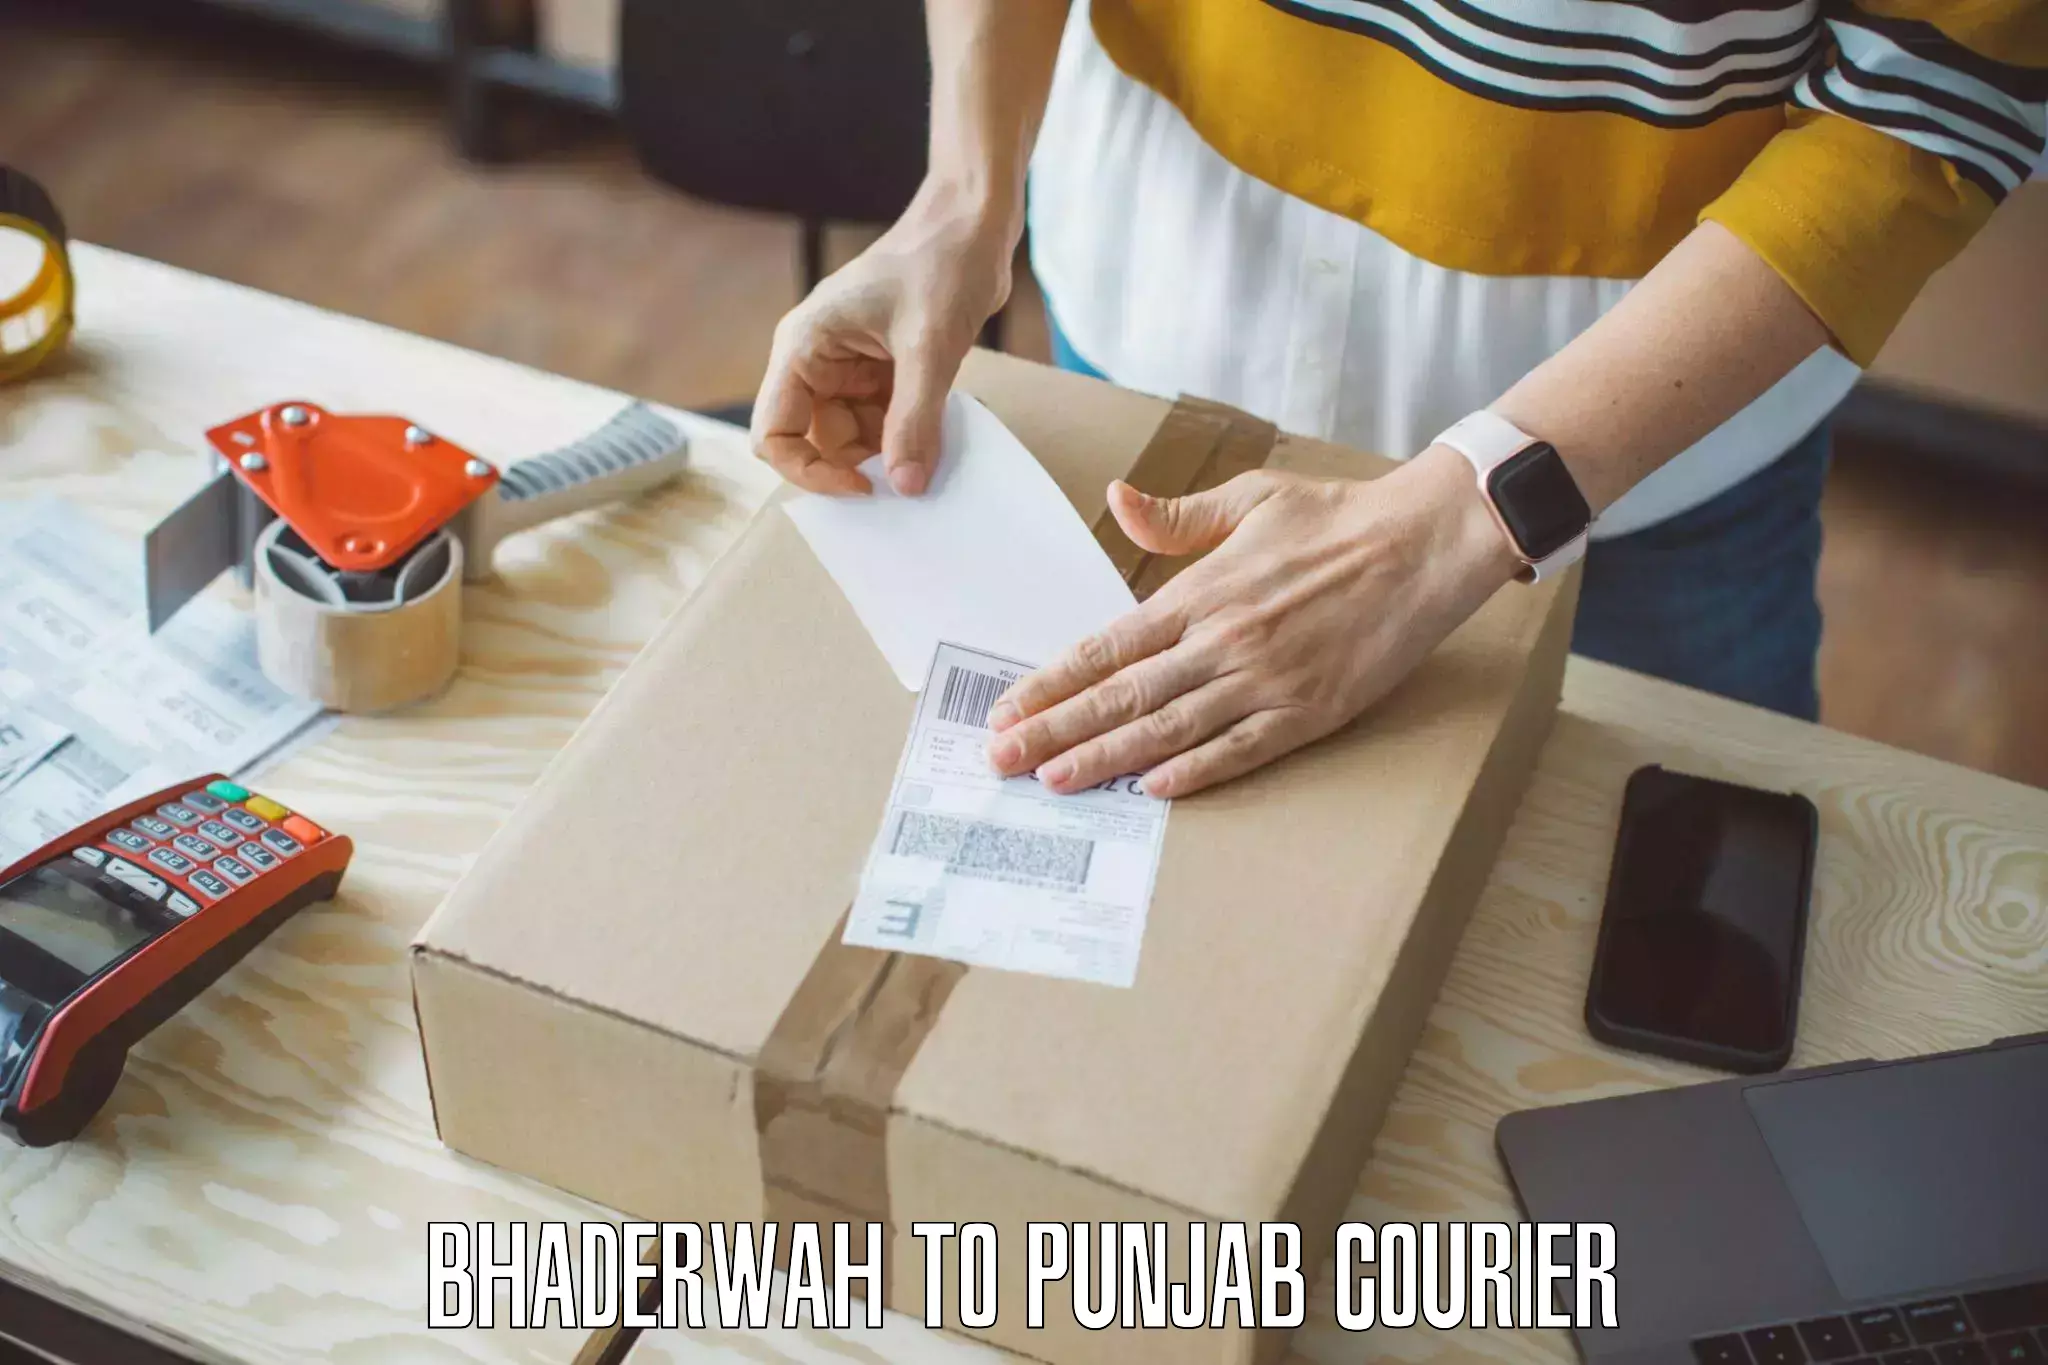 Furniture moving experts Bhaderwah to Khanna